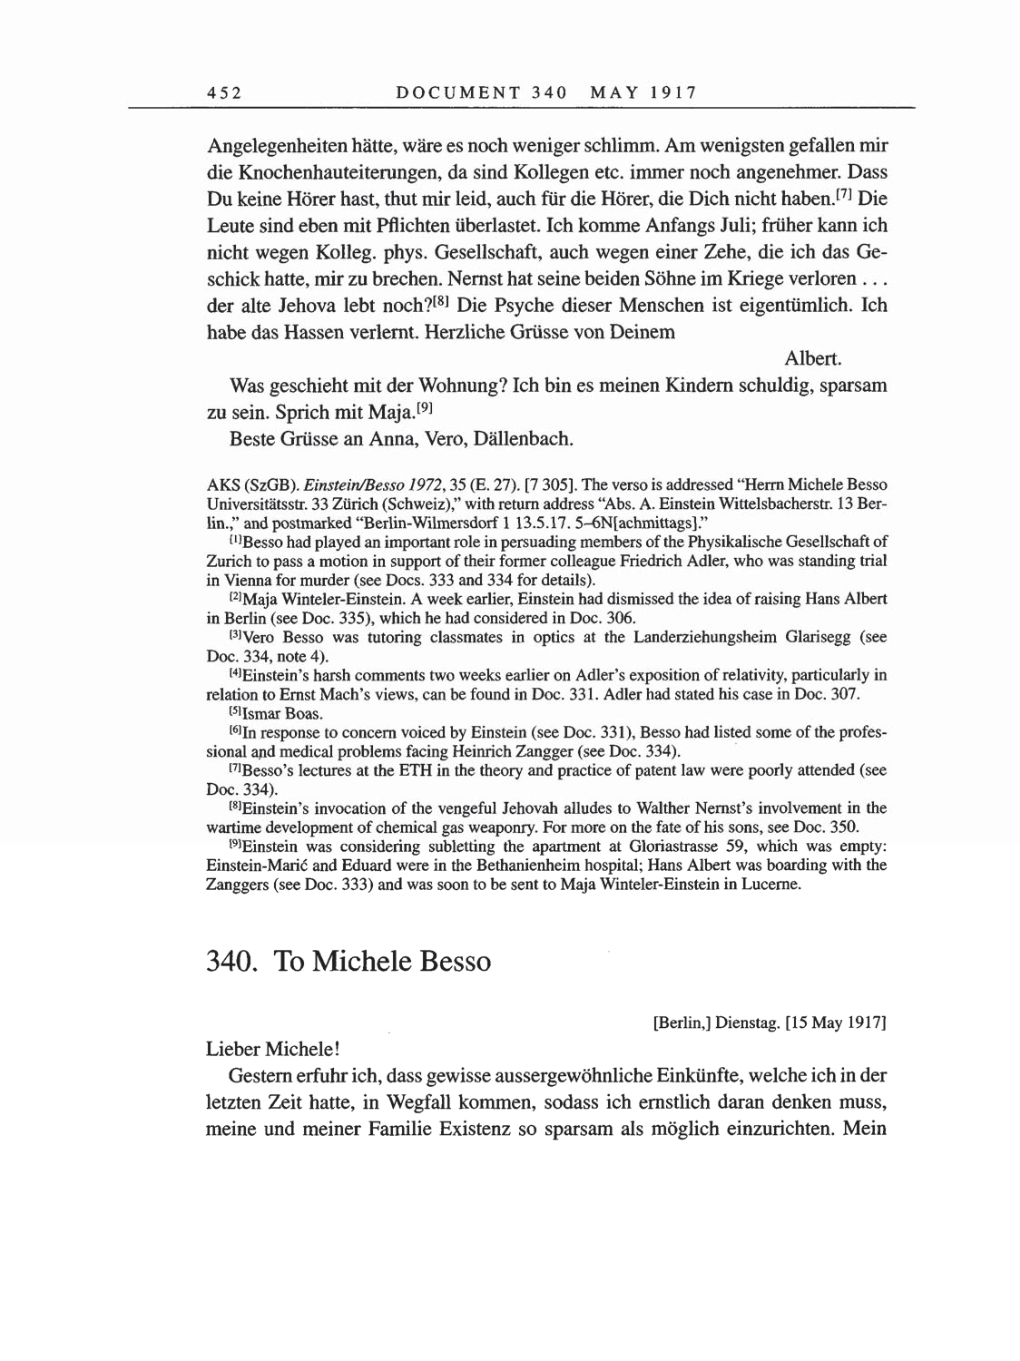 Volume 8, Part A: The Berlin Years: Correspondence 1914-1917 page 452